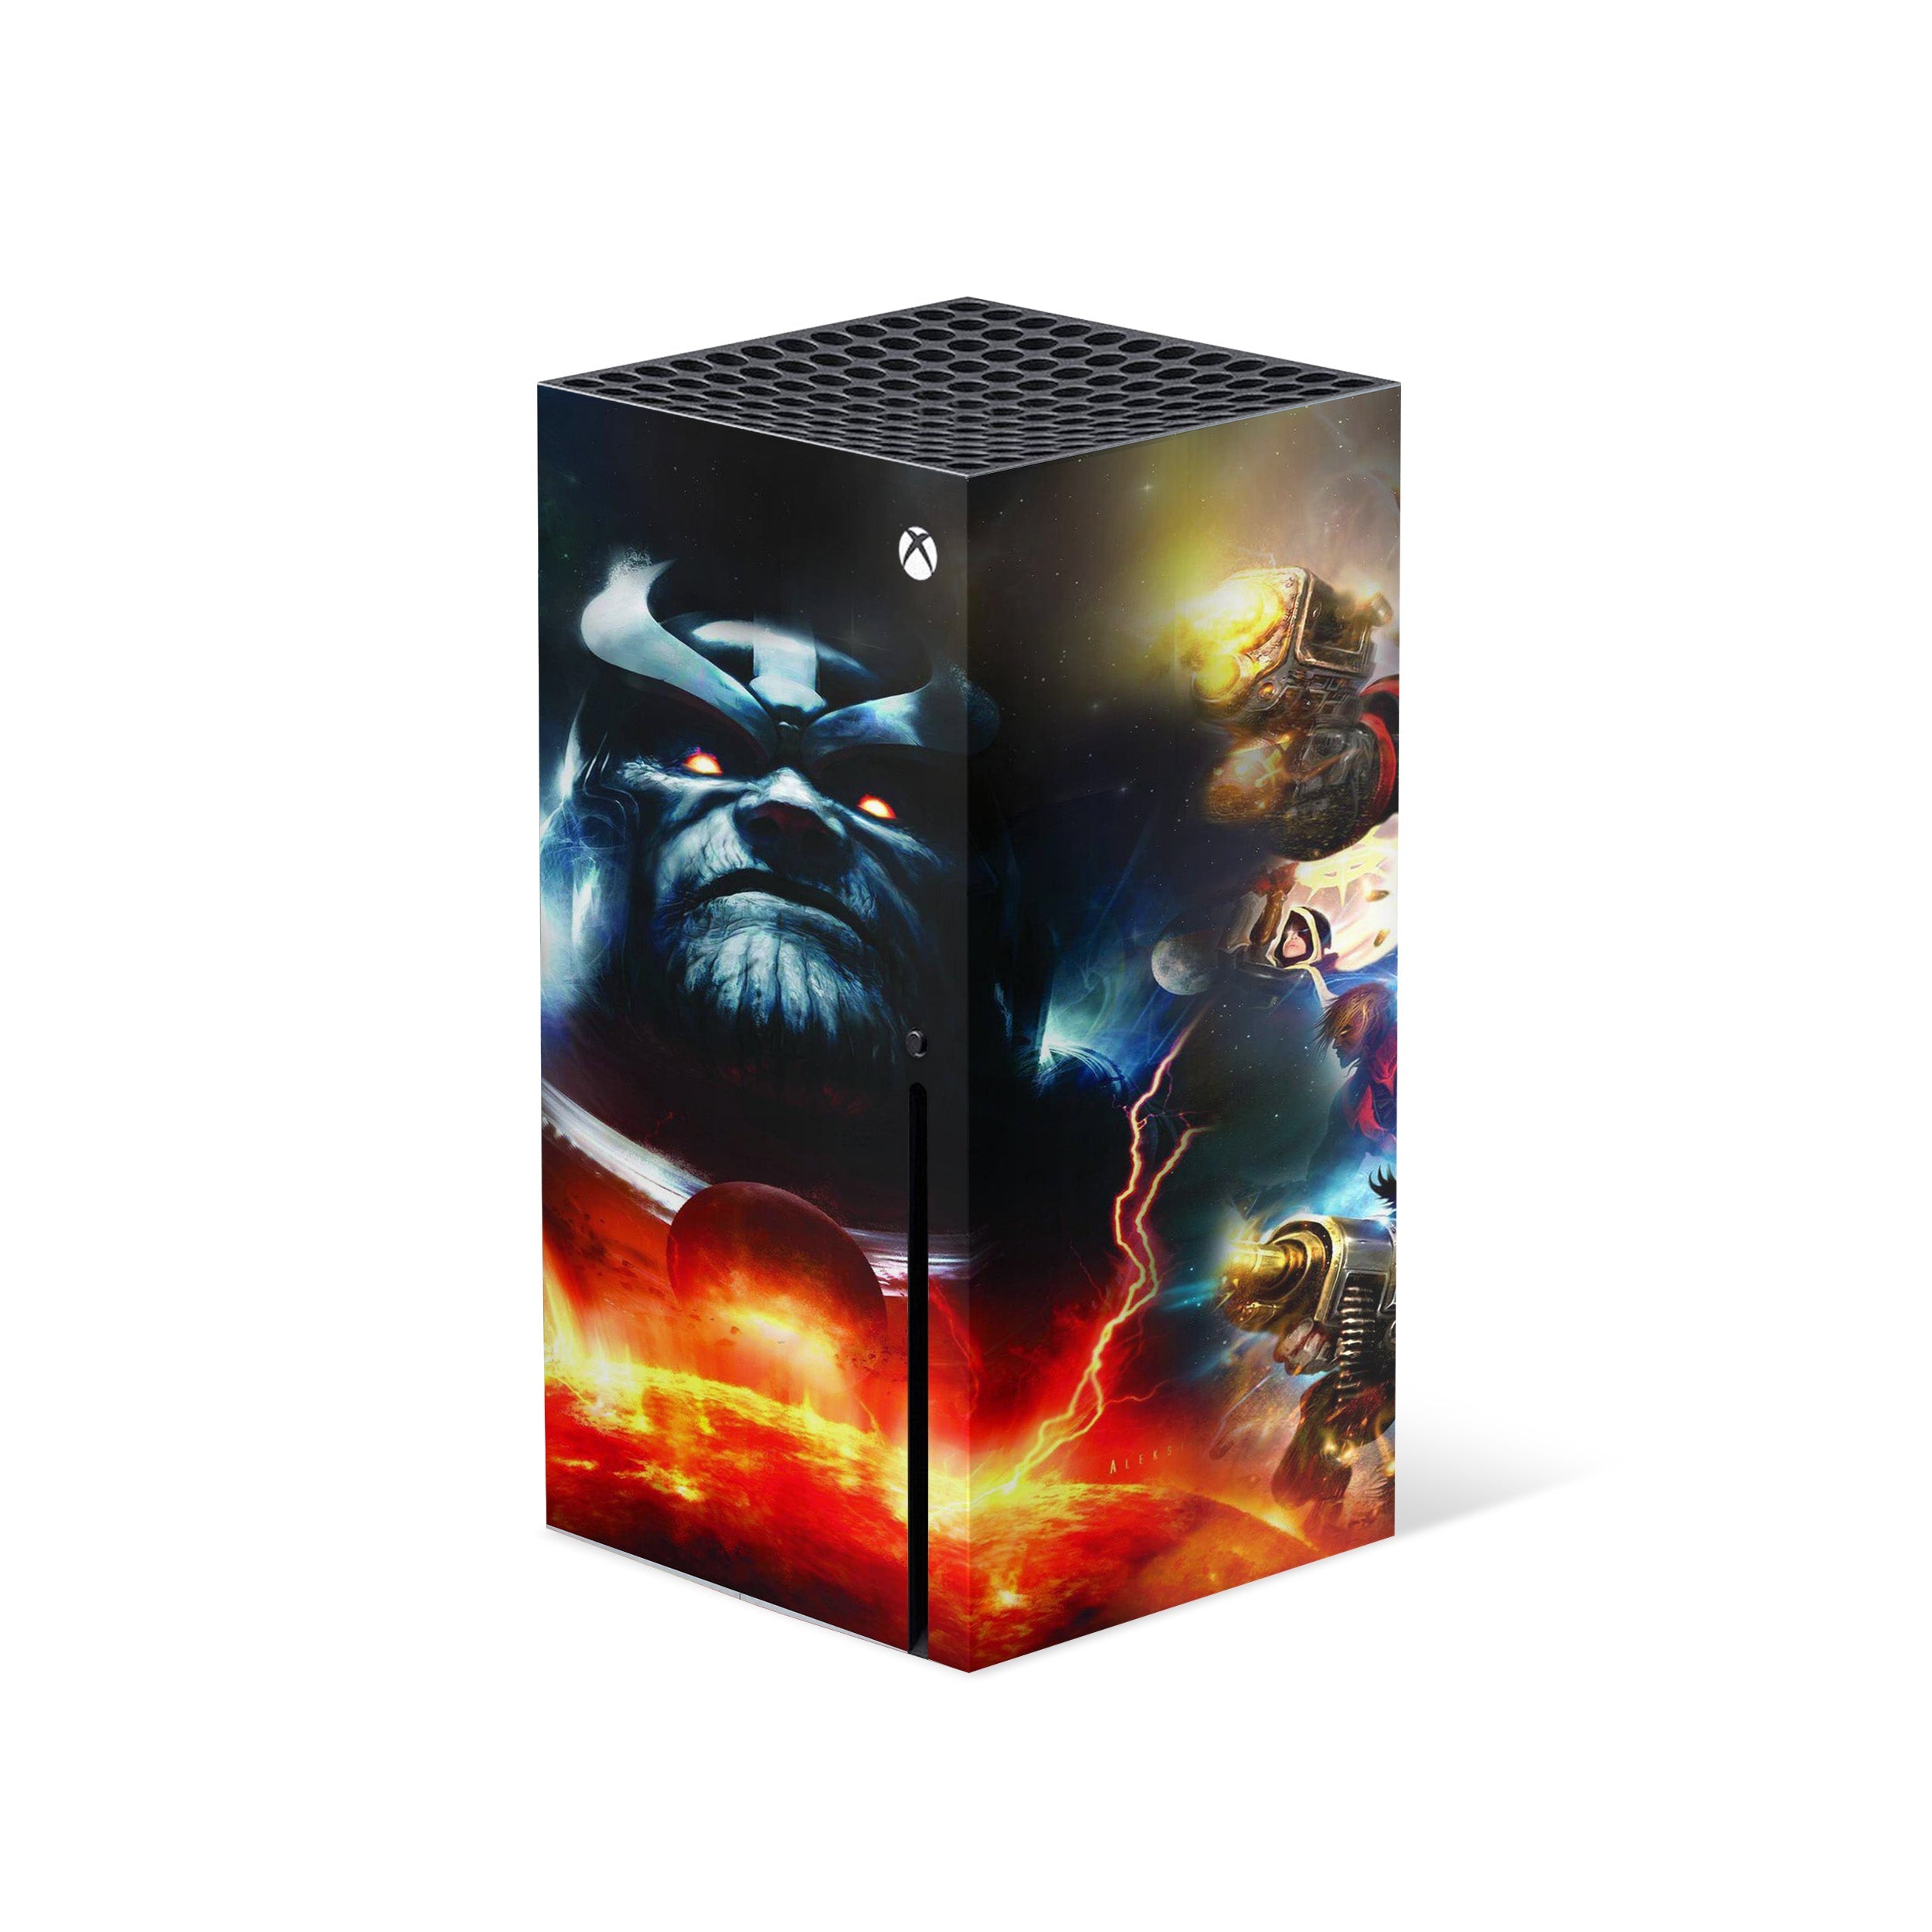 A video game skin featuring a Marvel Thanos design for the Xbox Series X.